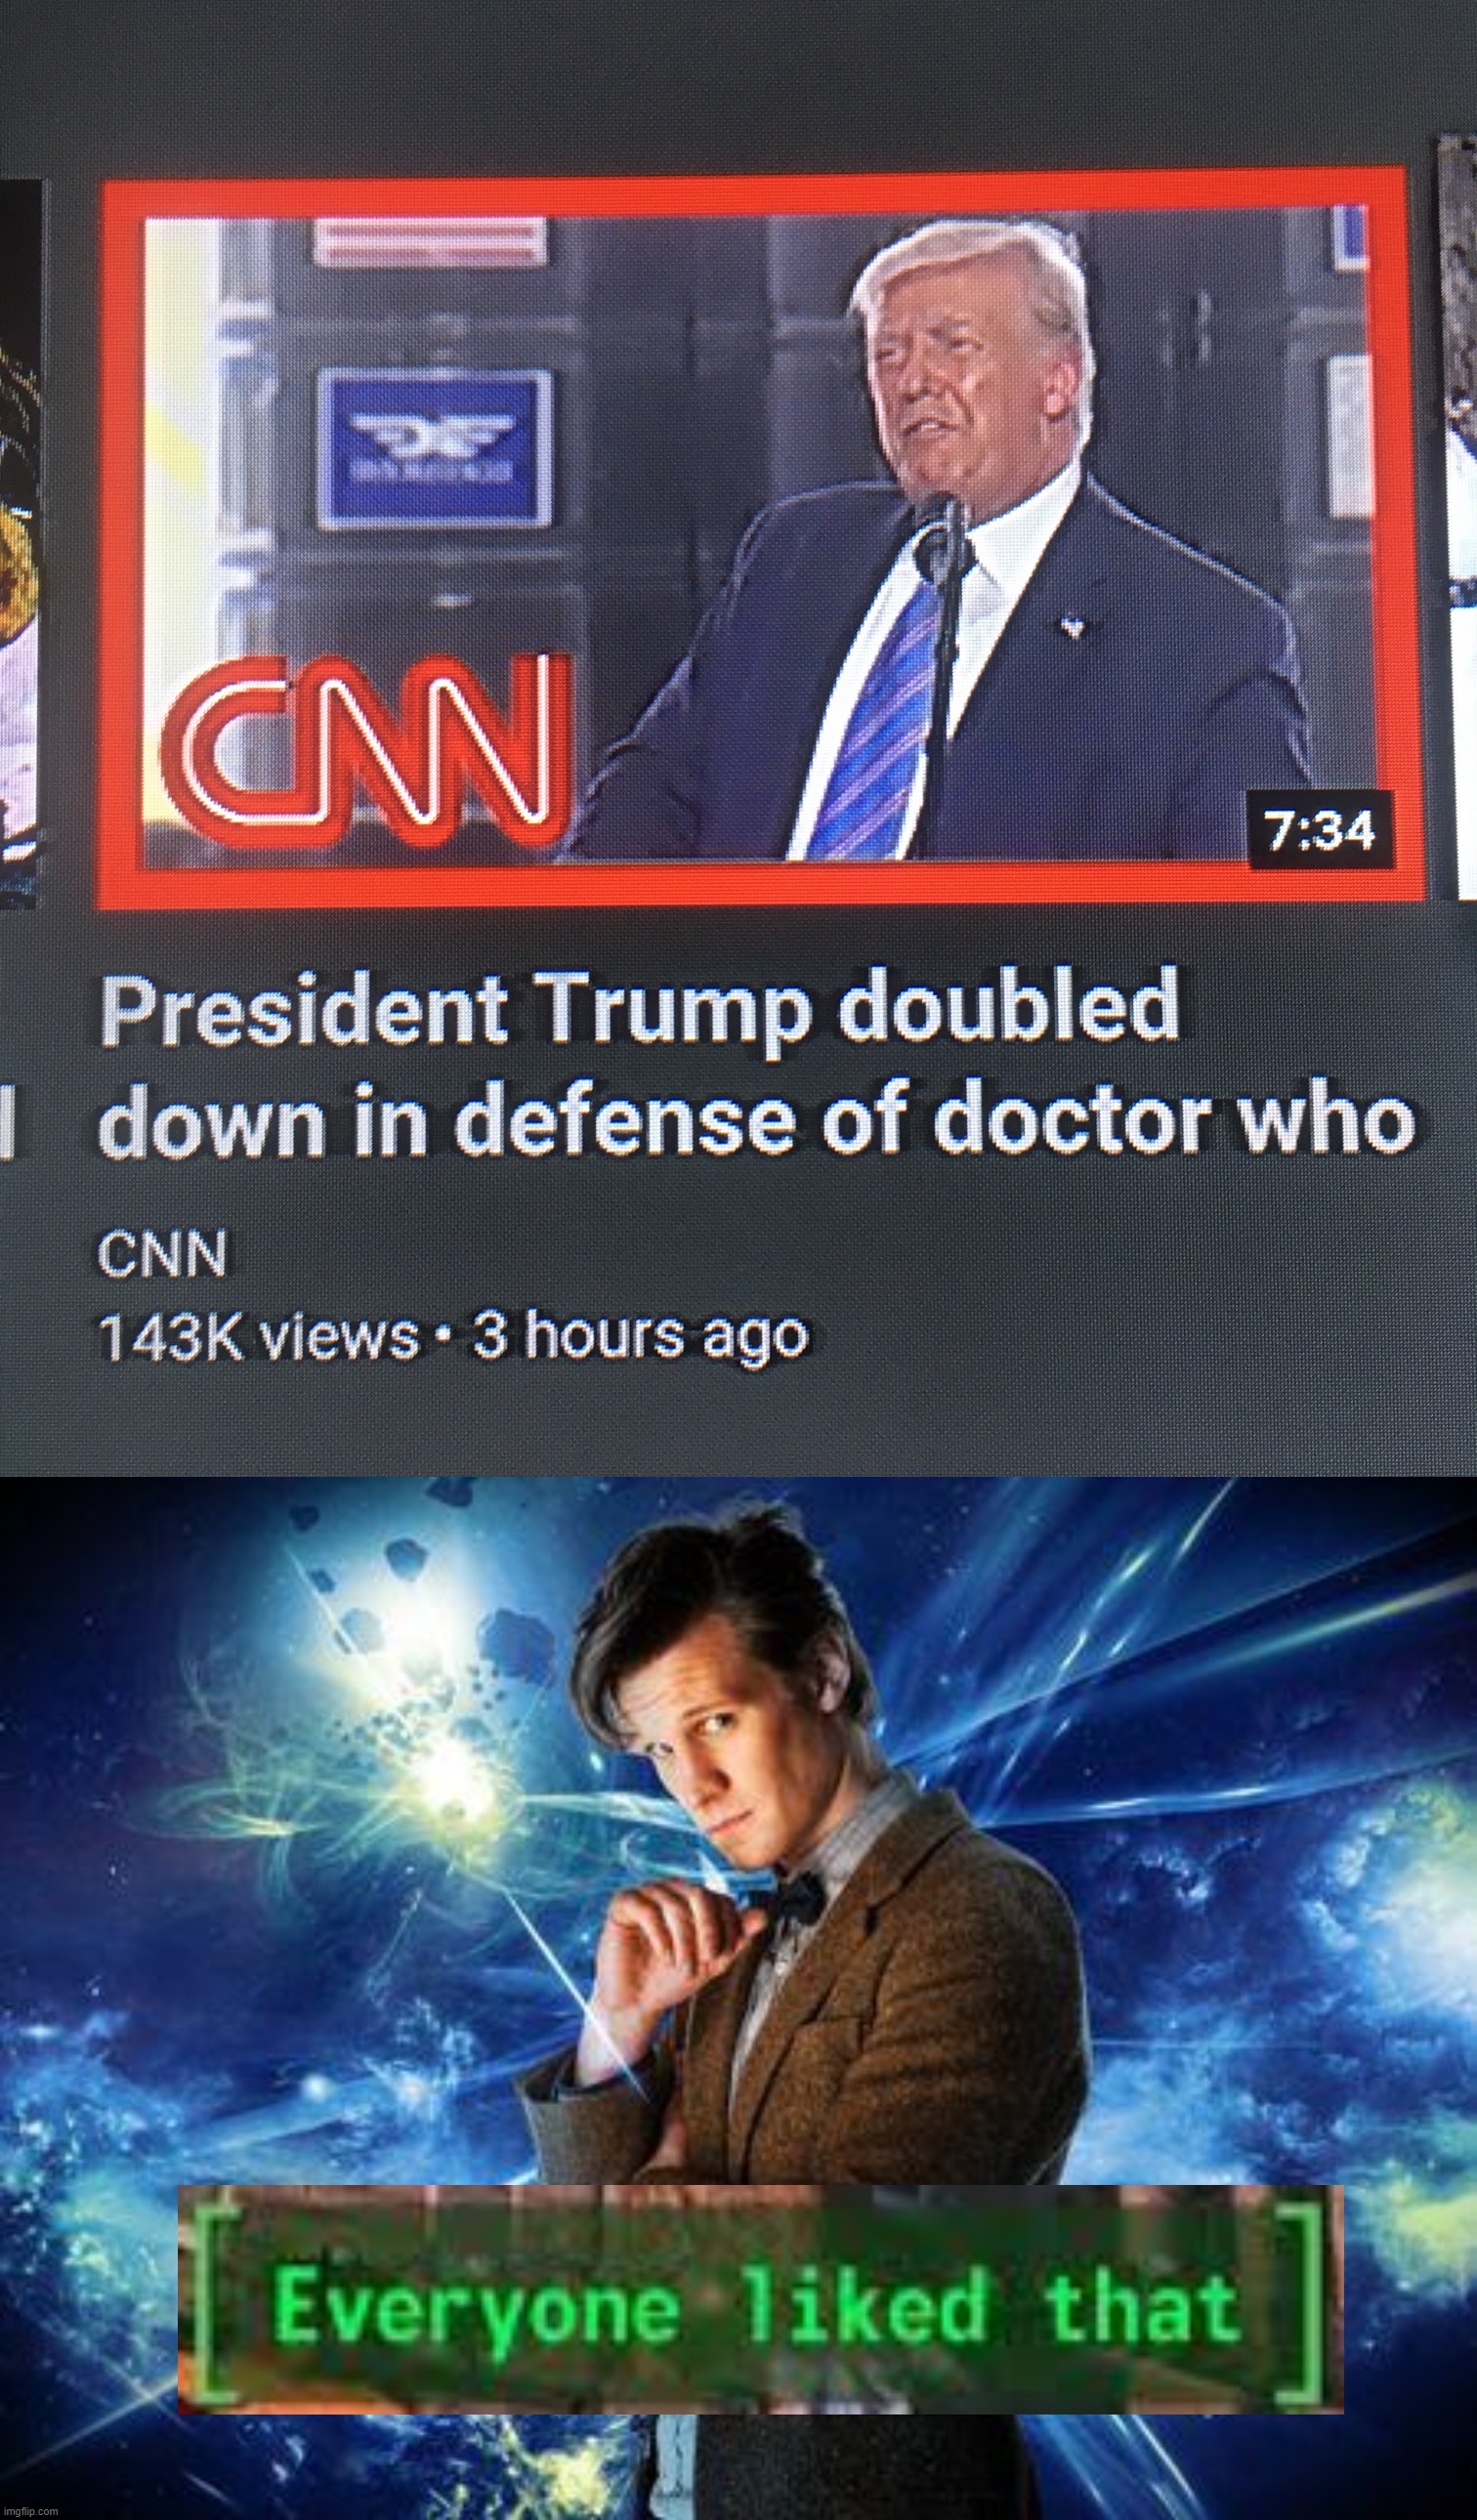 Ah, yes, but which incarnation? | image tagged in dr who and donald trump,dr who,trump,defends,dr,who | made w/ Imgflip meme maker